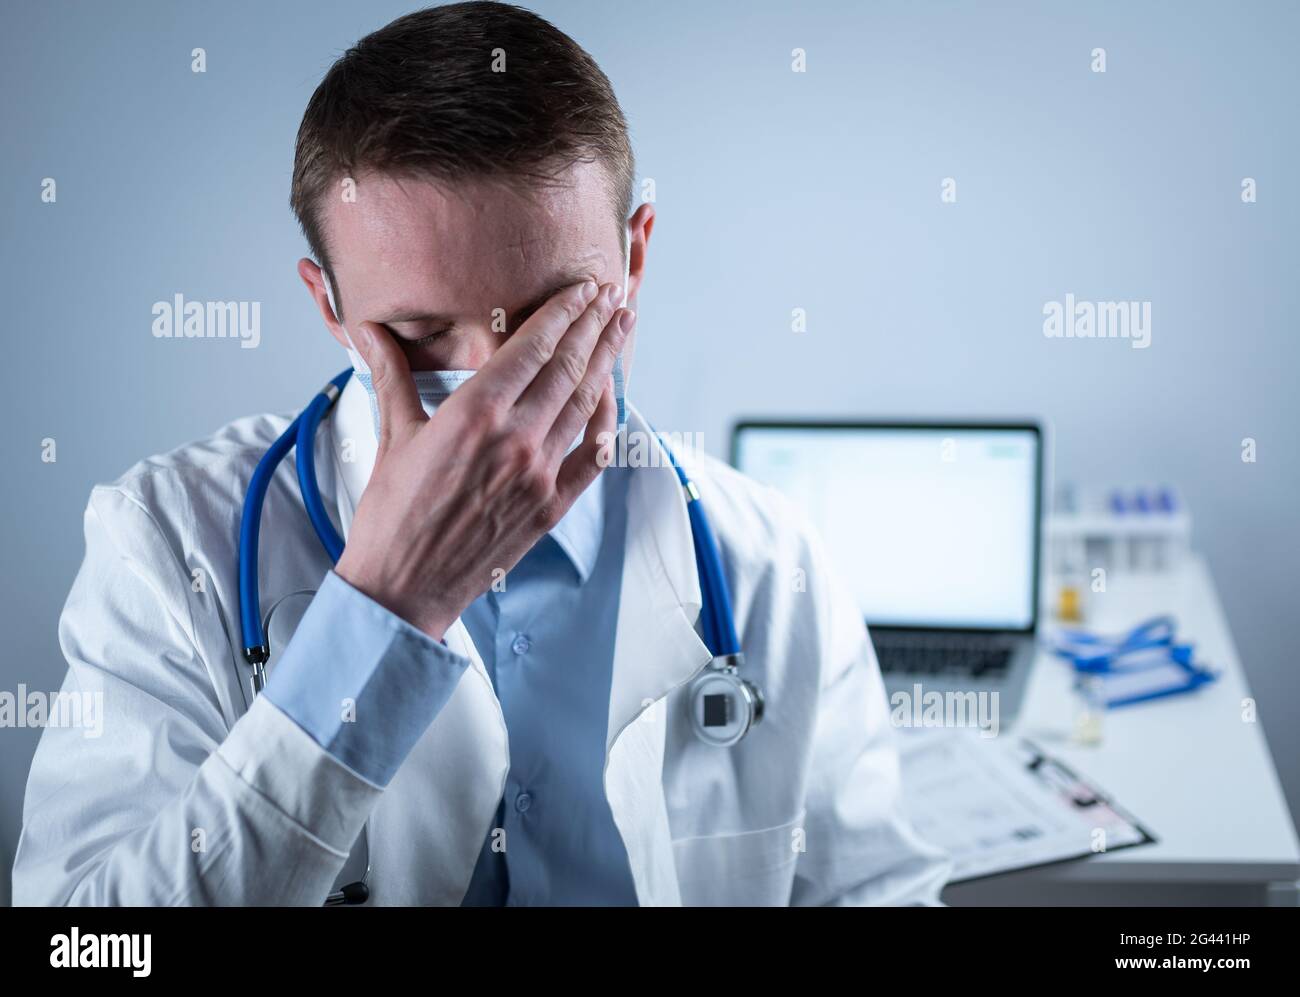 Exhausted young doctor in lab coat takes off mask and glasses, rubs eyes, has headache from fatigue and overexertion from workin Stock Photo